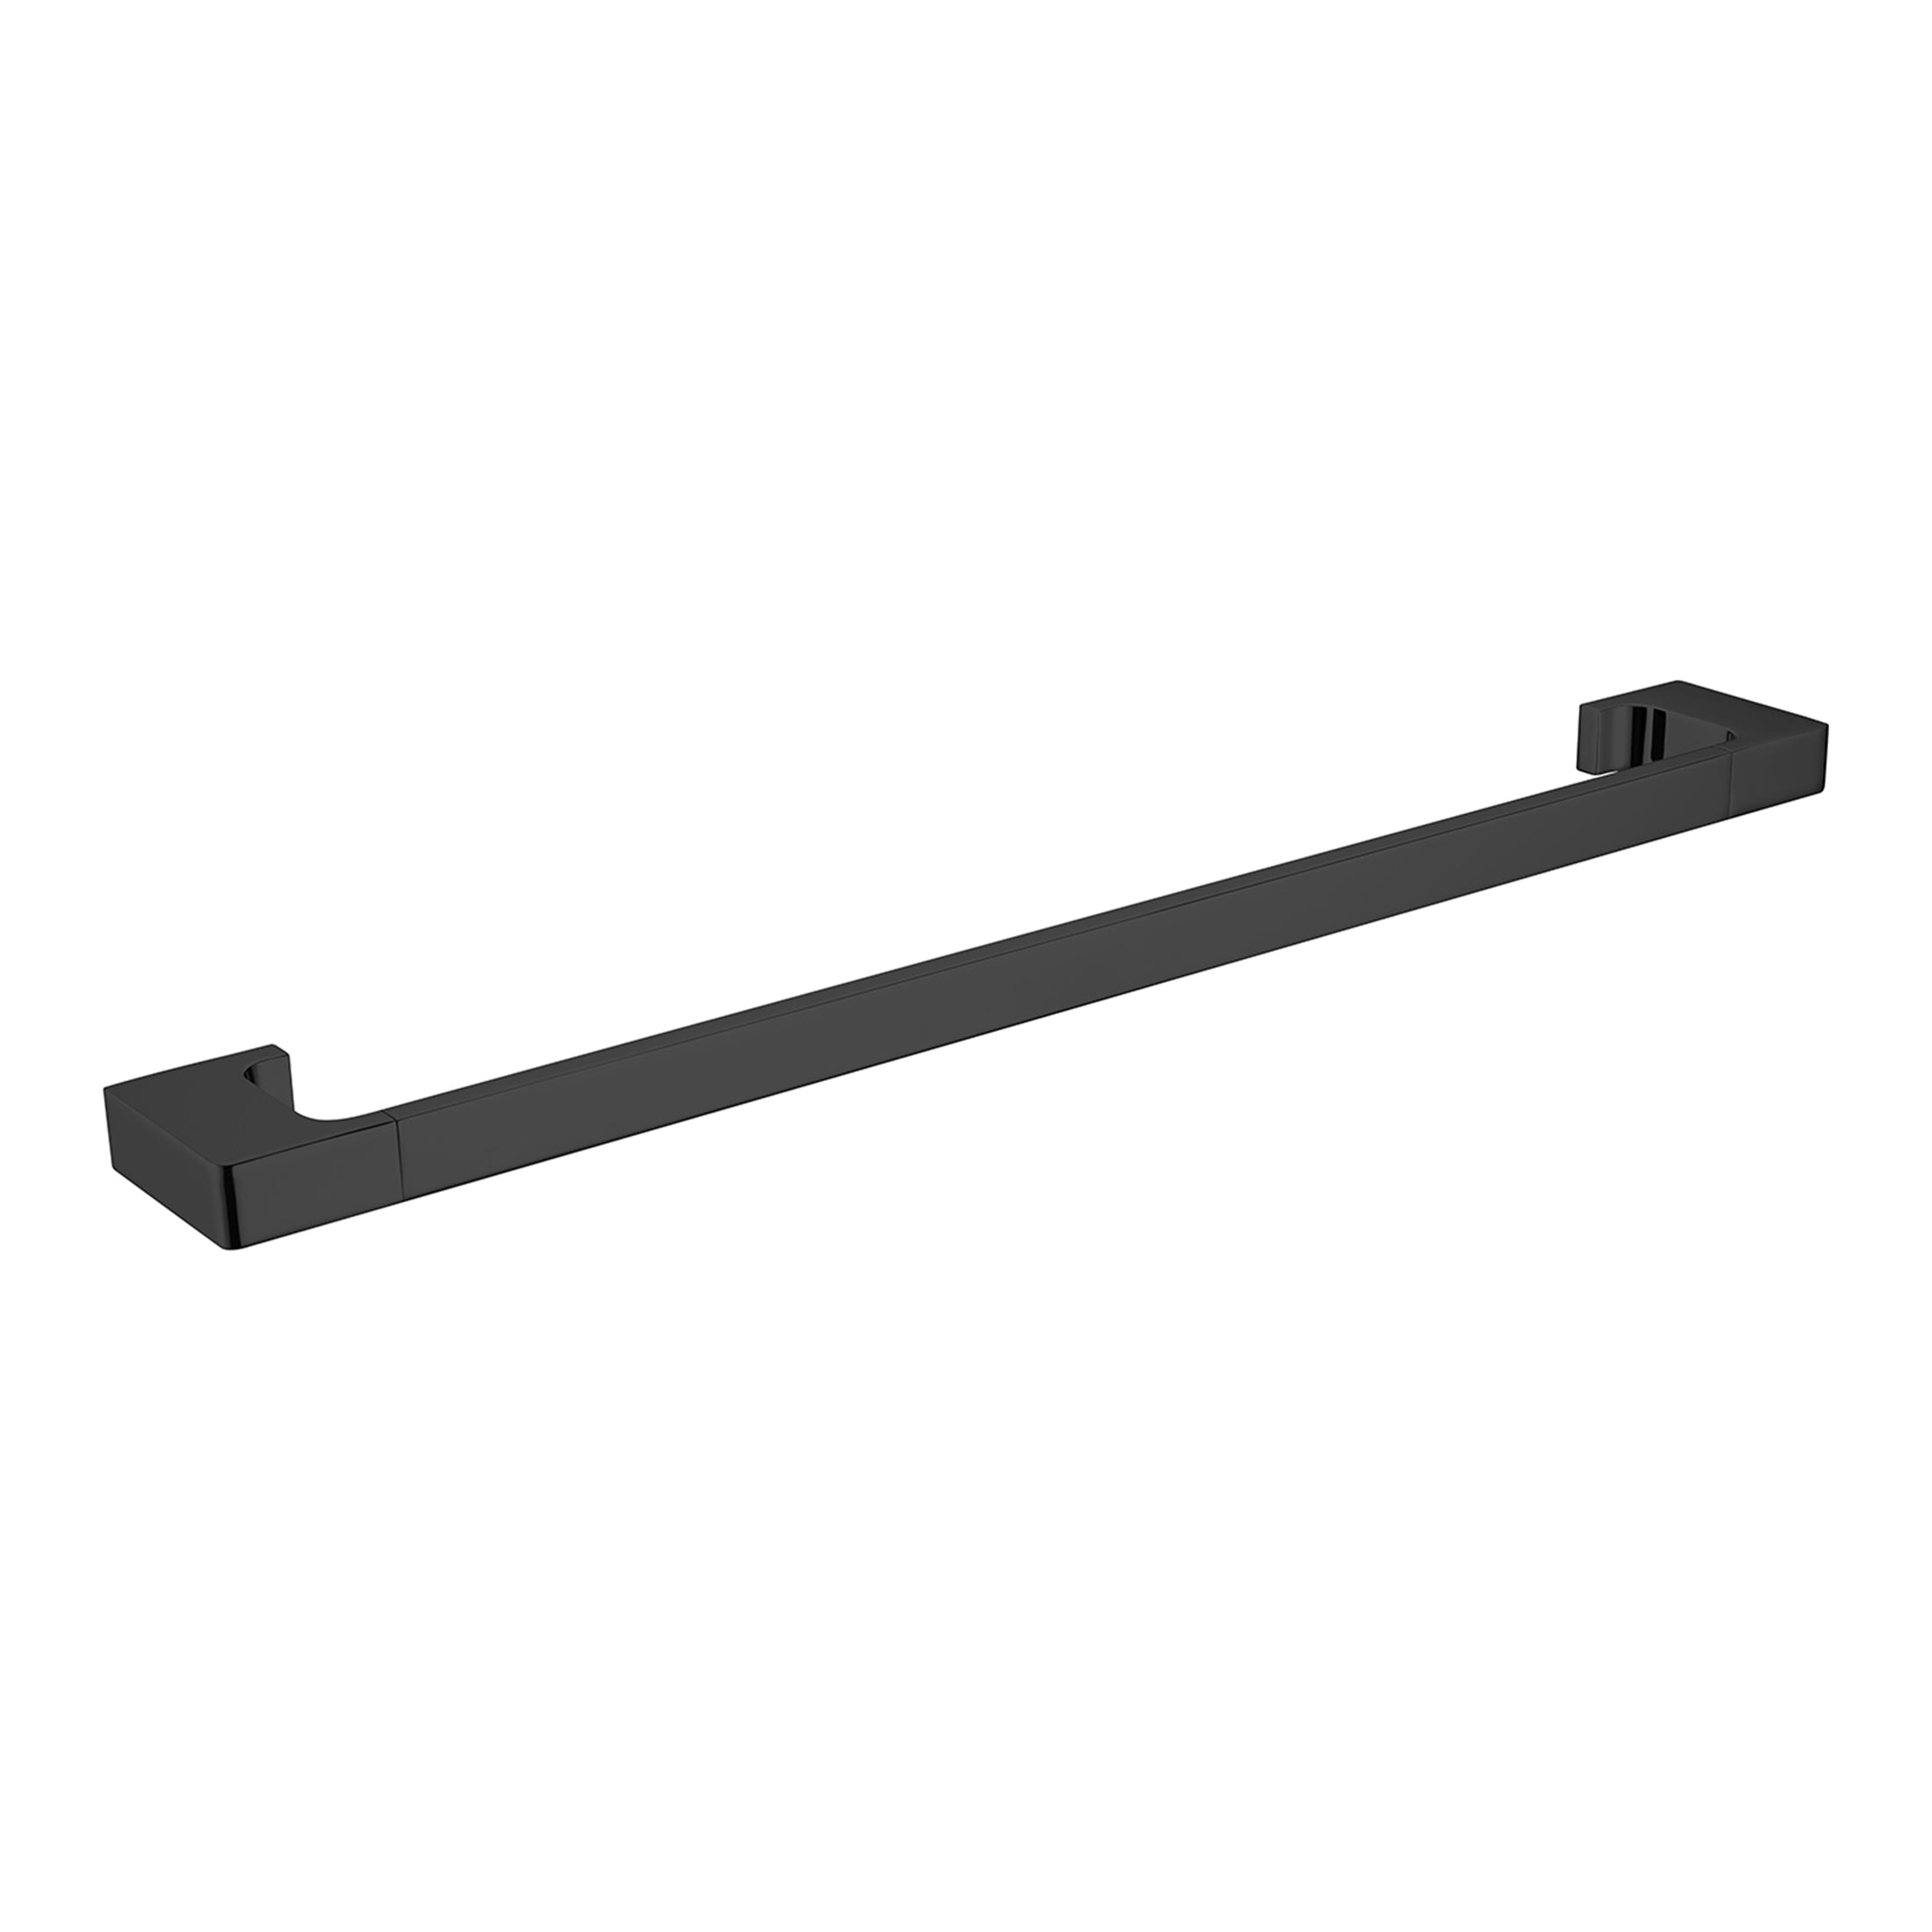 NERO PEARL NON-HEATED SINGLE TOWEL RAIL MATTE BLACK (AVAILABLE IN 600MM AND 800MM)